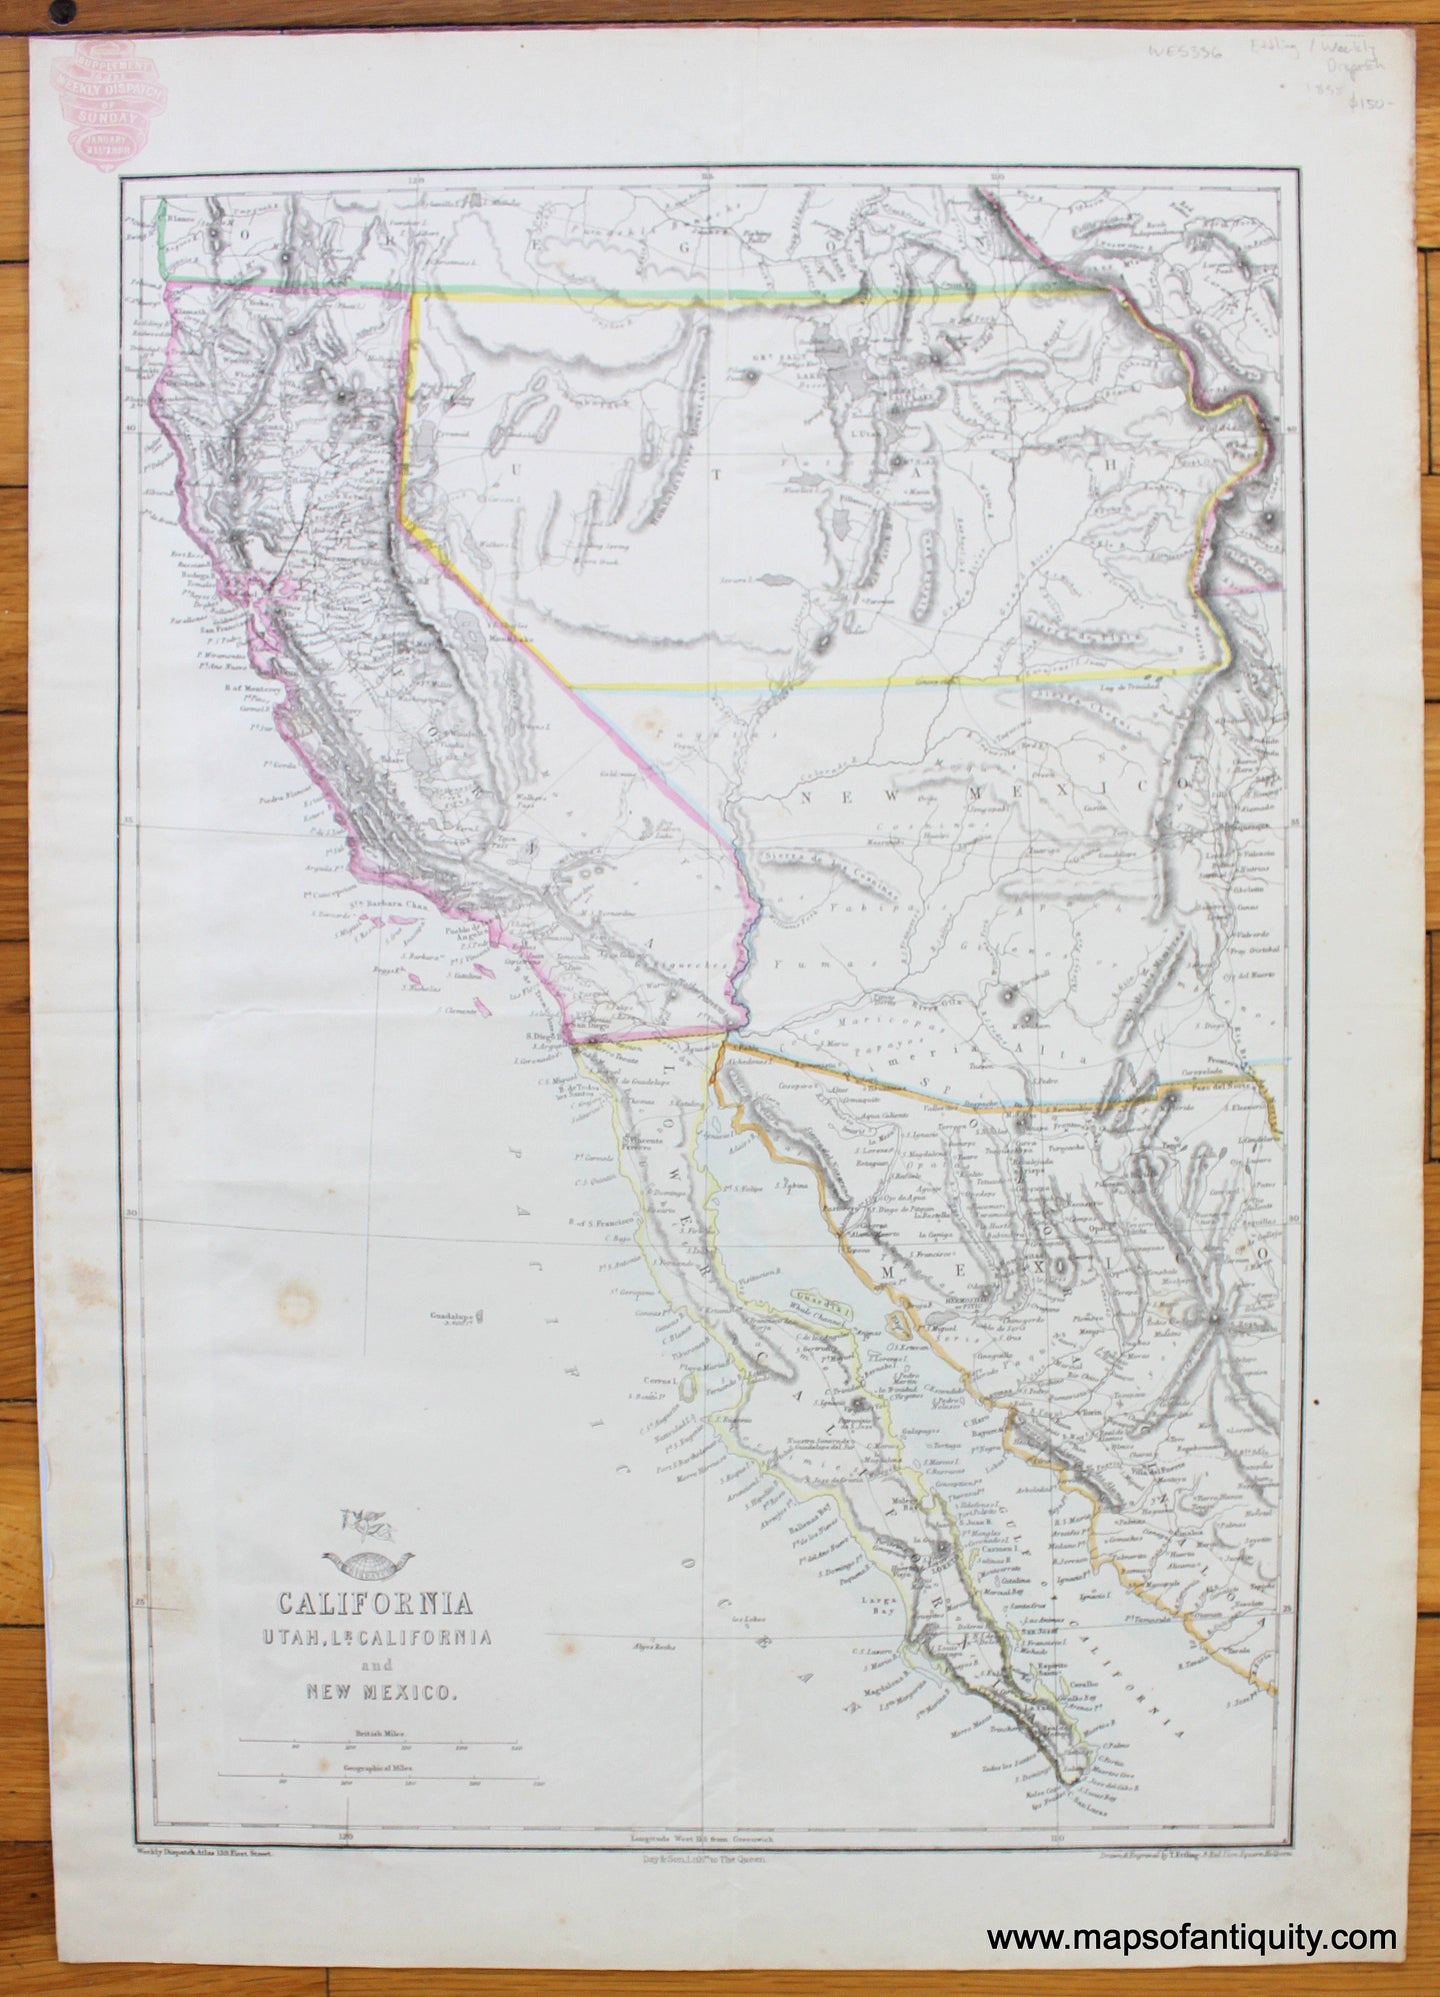 Antique-Hand-Colored-Map-California-Utah-Lr.-California-and-New-Mexico-1858-Ettling/Weekly-Dispatch-West-1800s-19th-century-Maps-of-Antiquity